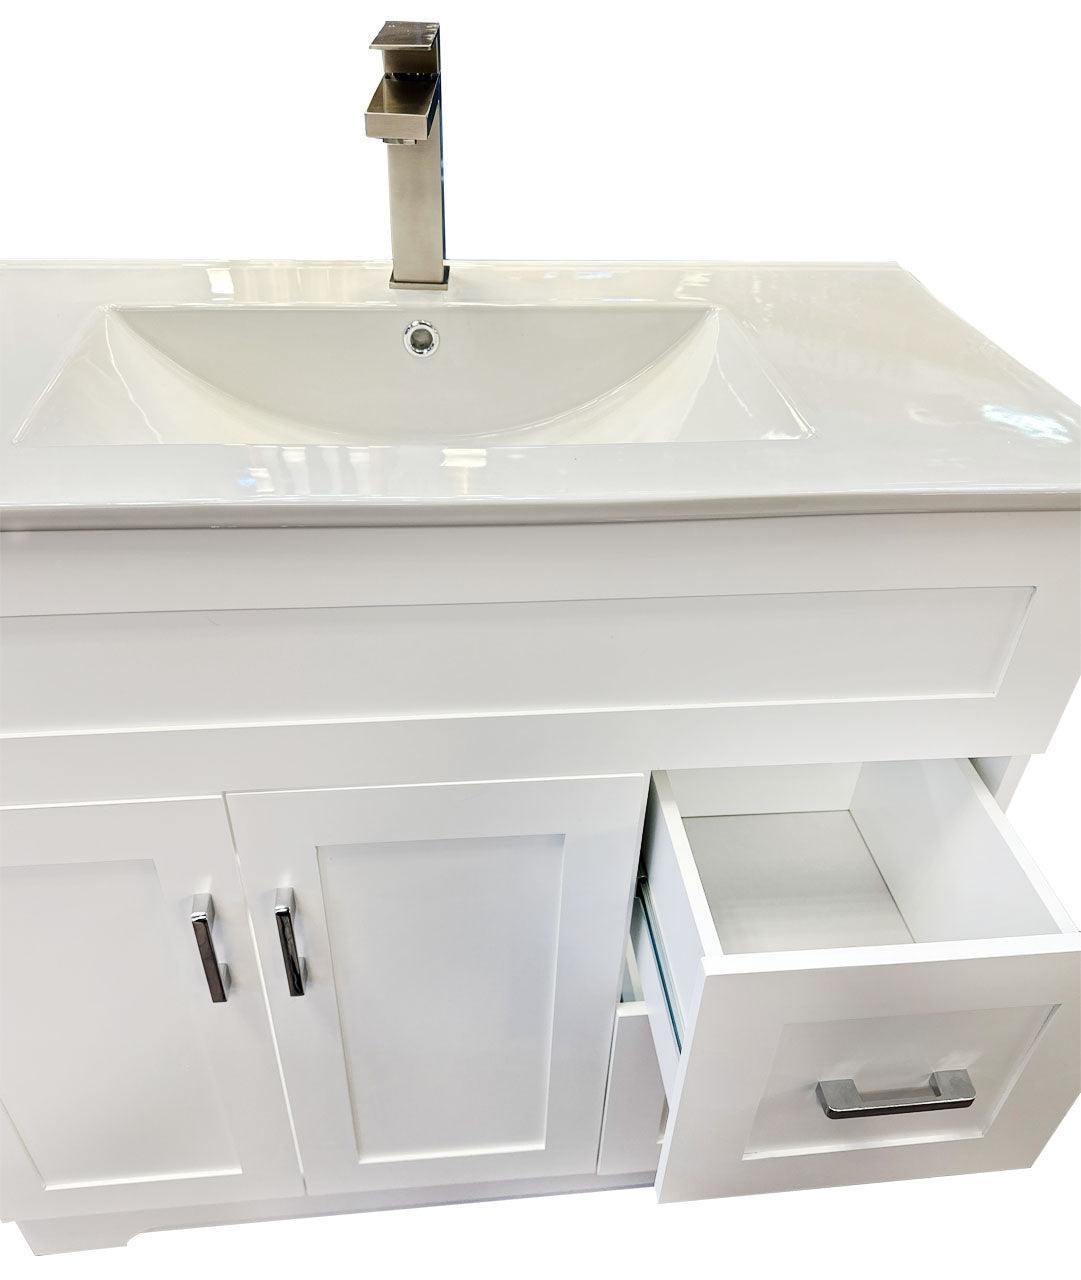 Marius 36" Modern Single Bathroom Vanity with Ceramic Sink, Include Two Doors, White - Hbdepot